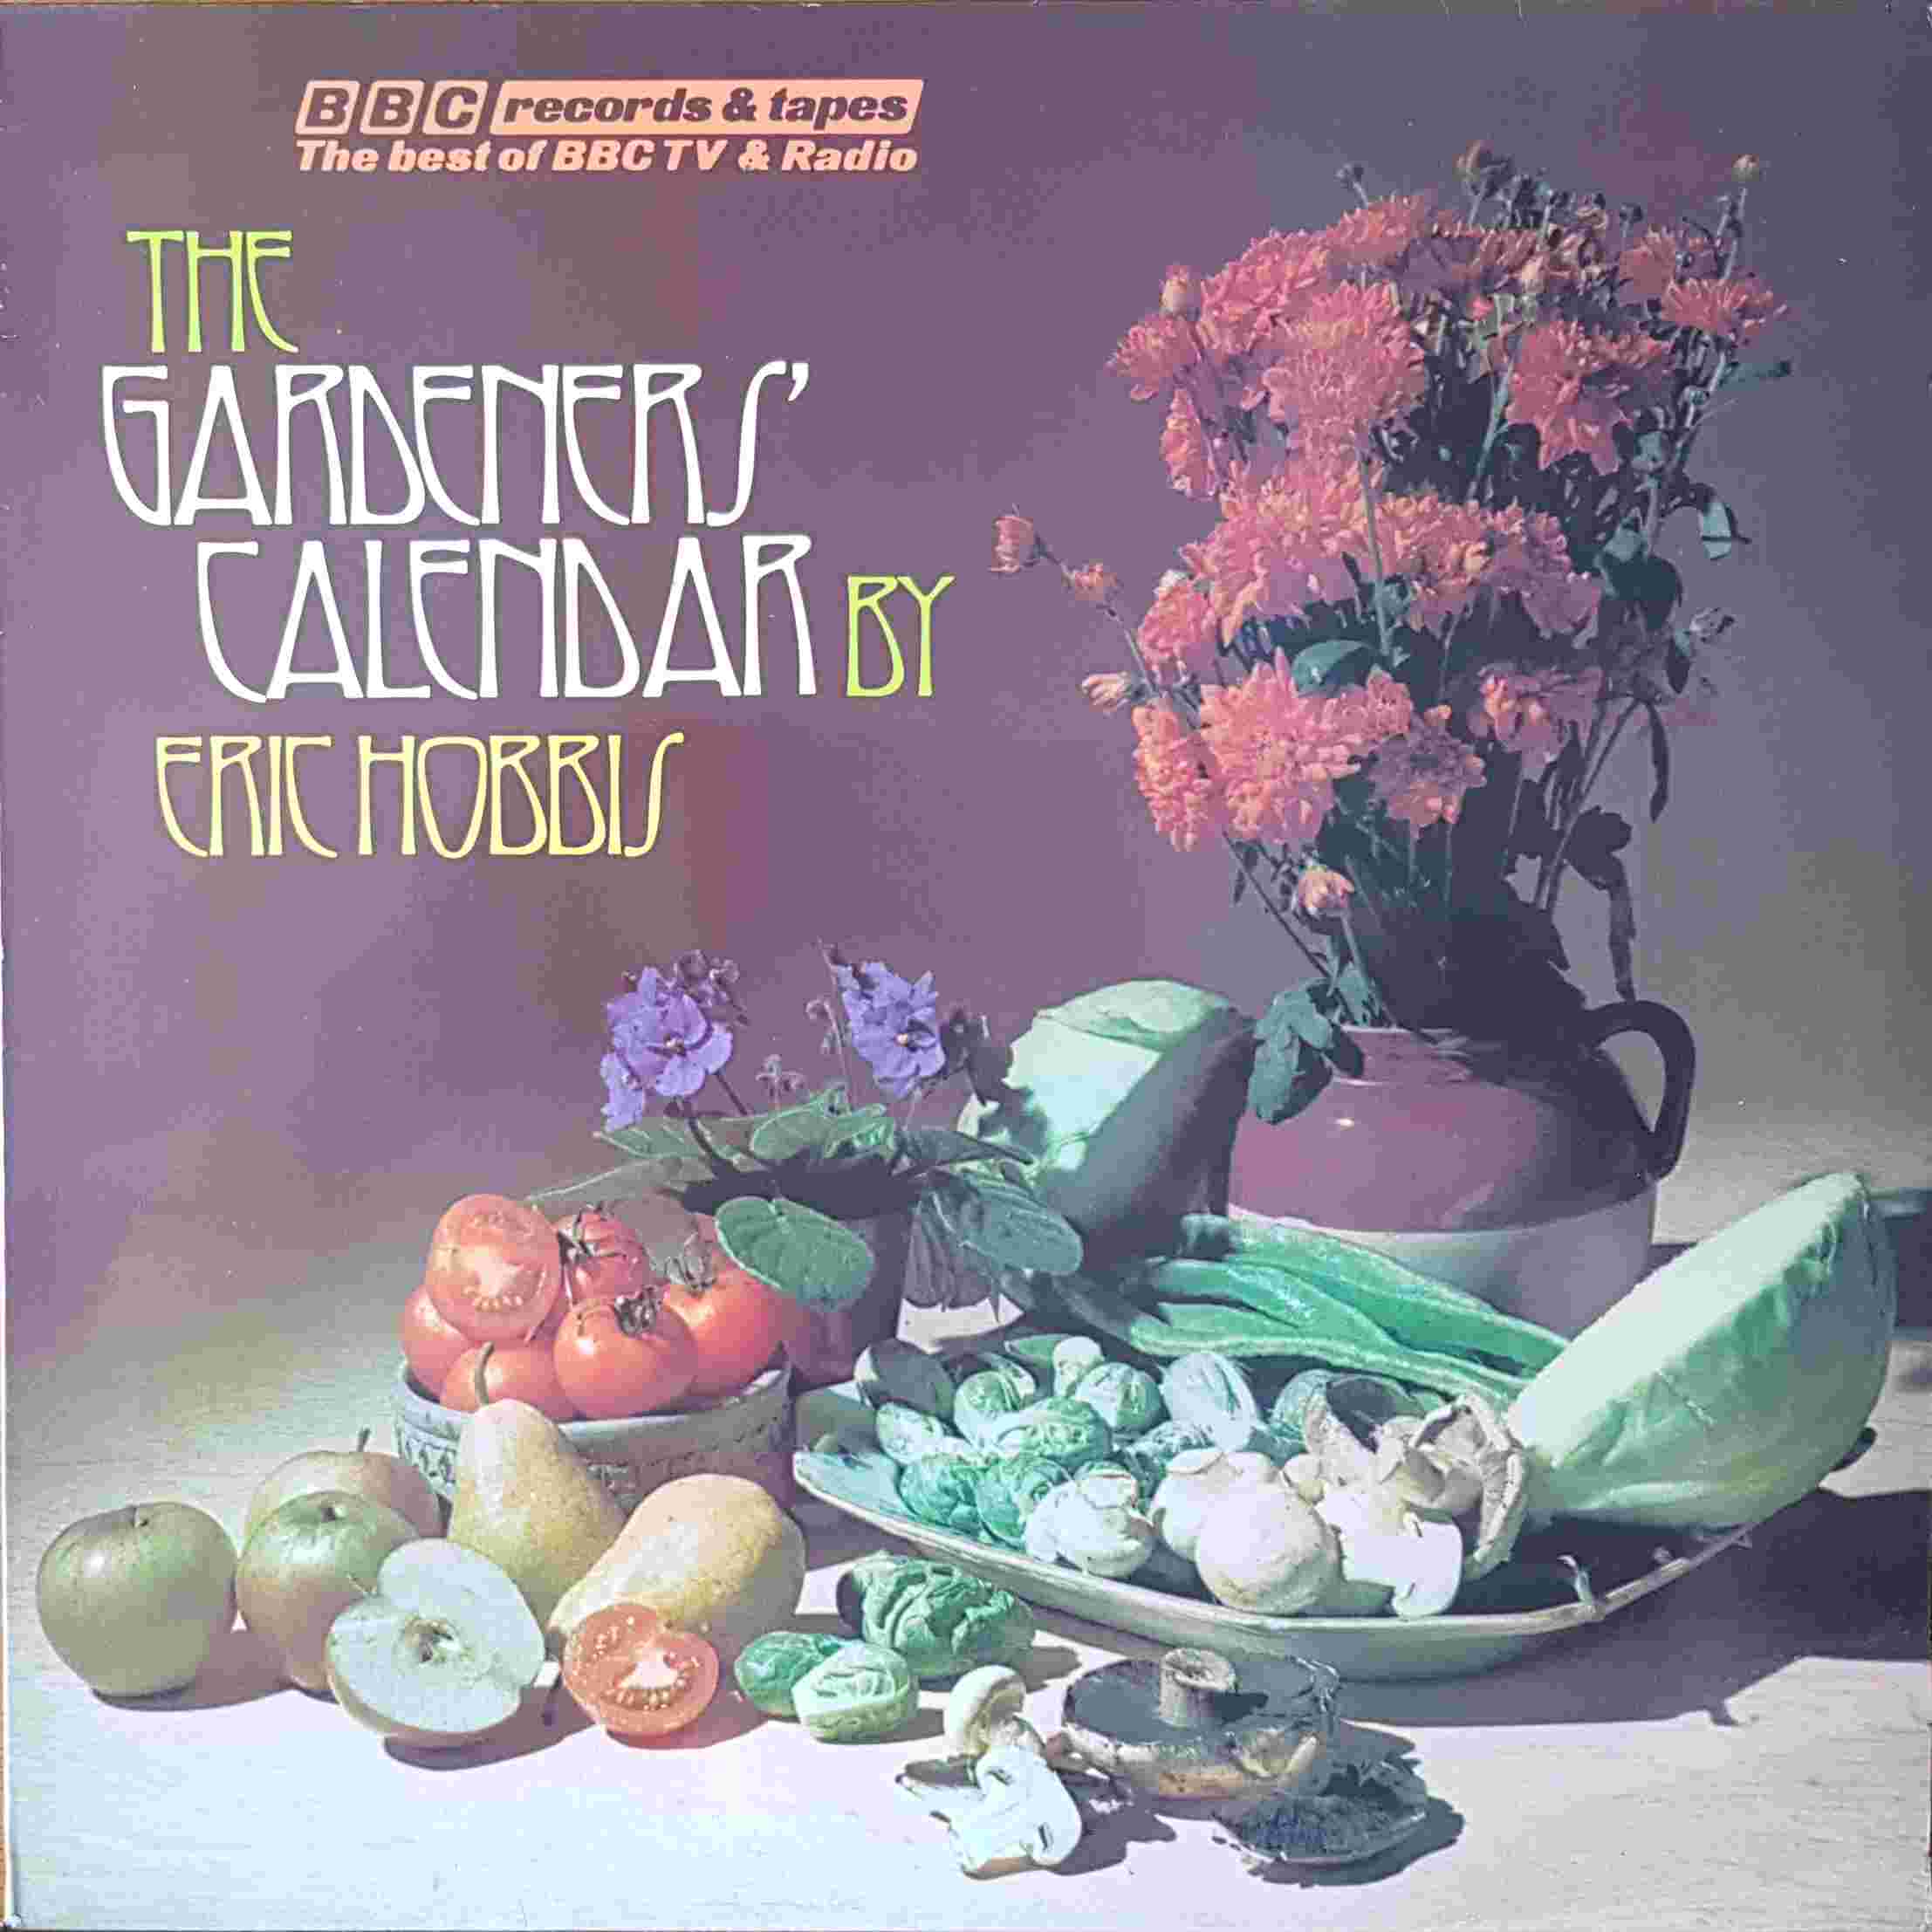 Picture of REC 192 The gardeners' calendar by Eric Hobbs by artist Eric Hobbs from the BBC albums - Records and Tapes library